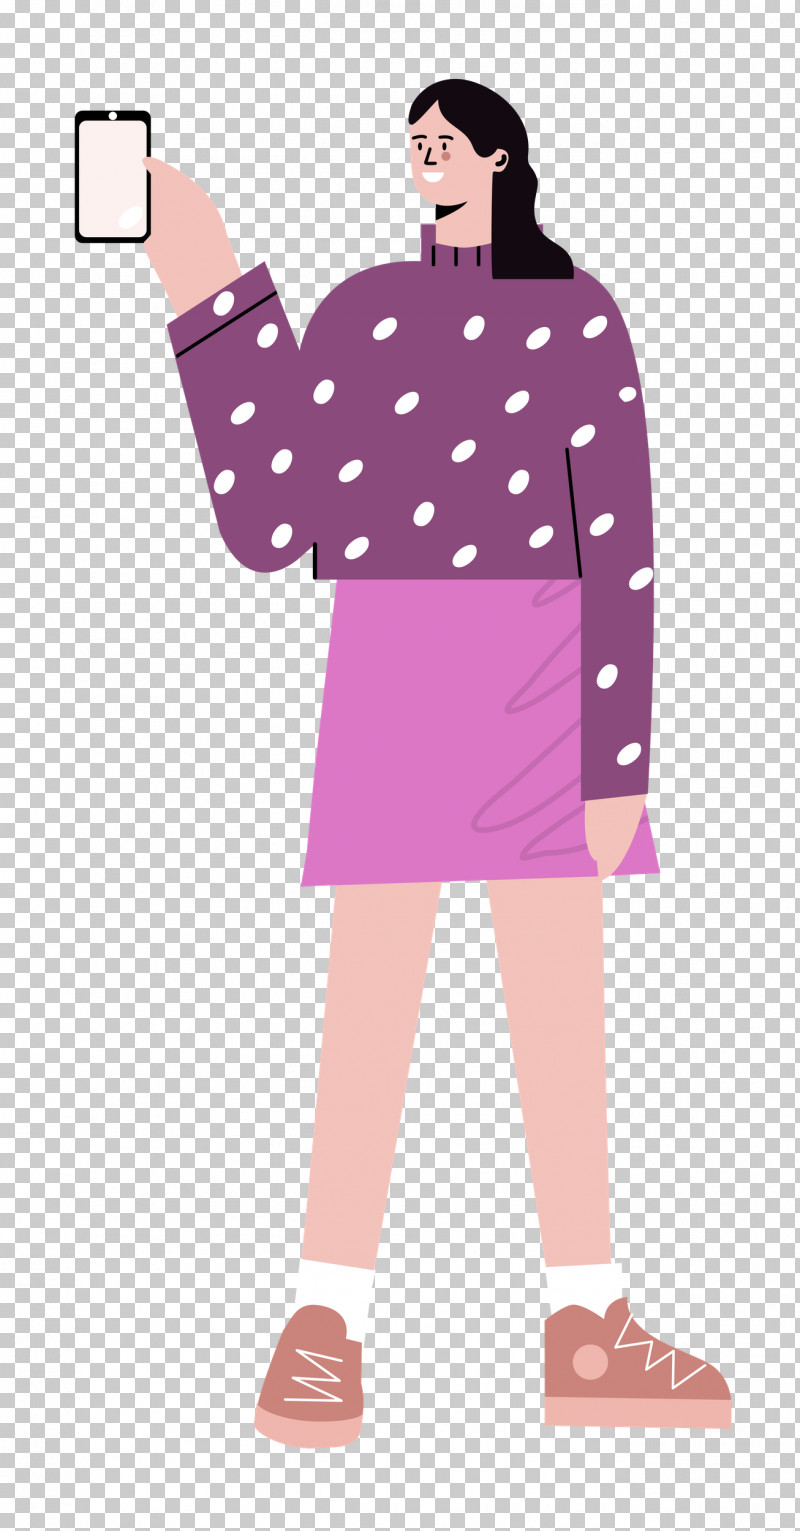 Standing Skirt Woman PNG, Clipart, Animation, Caricature, Cartoon, Cartoon Network, Drawing Free PNG Download